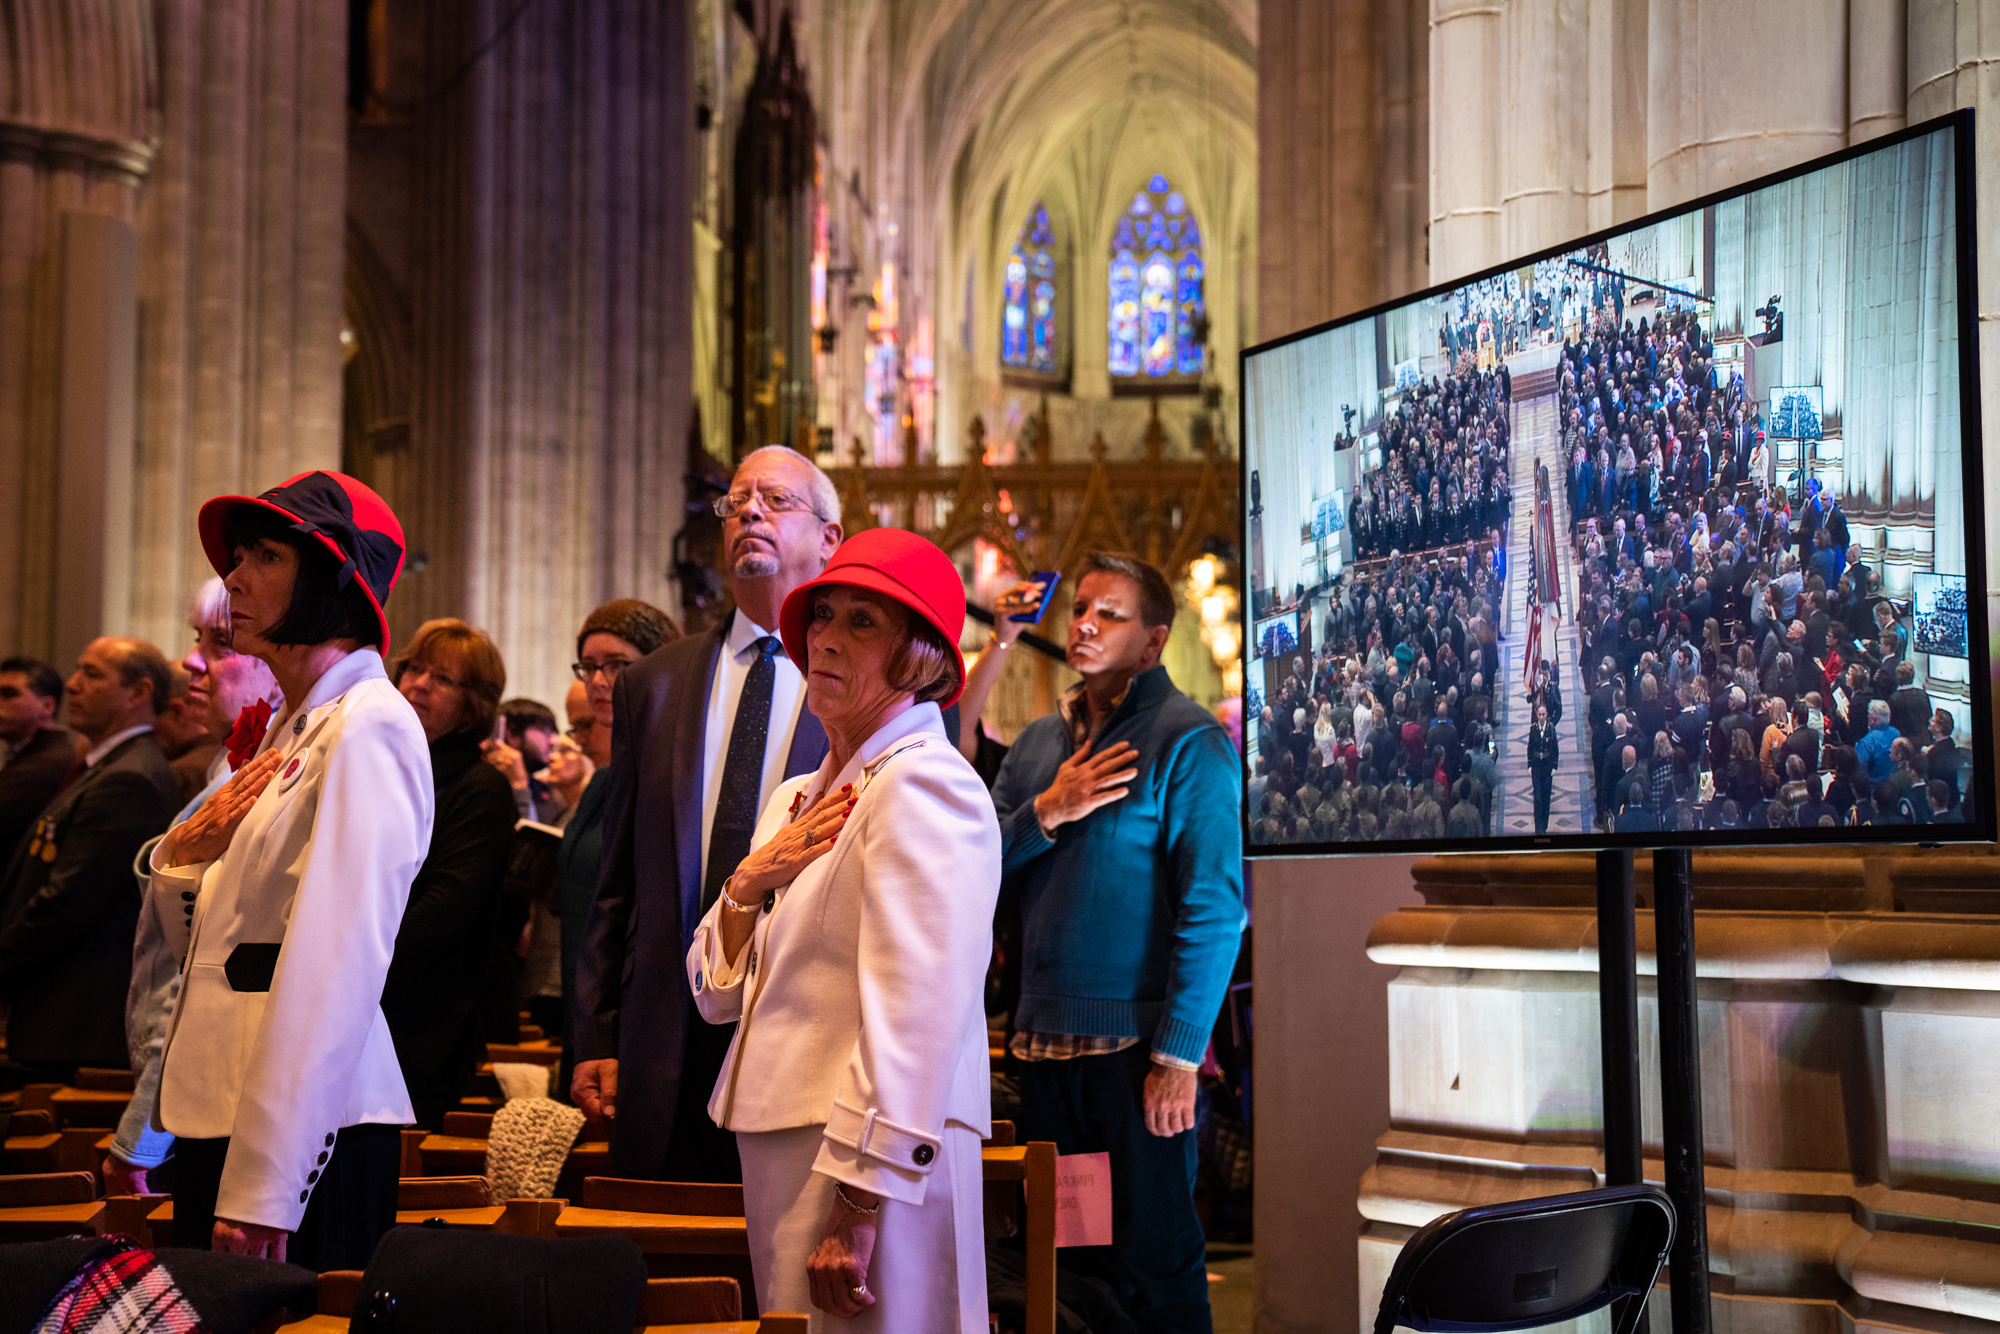  Attendees stand and acknowledge The National Anthem as the final procession passes through the cathedral. 